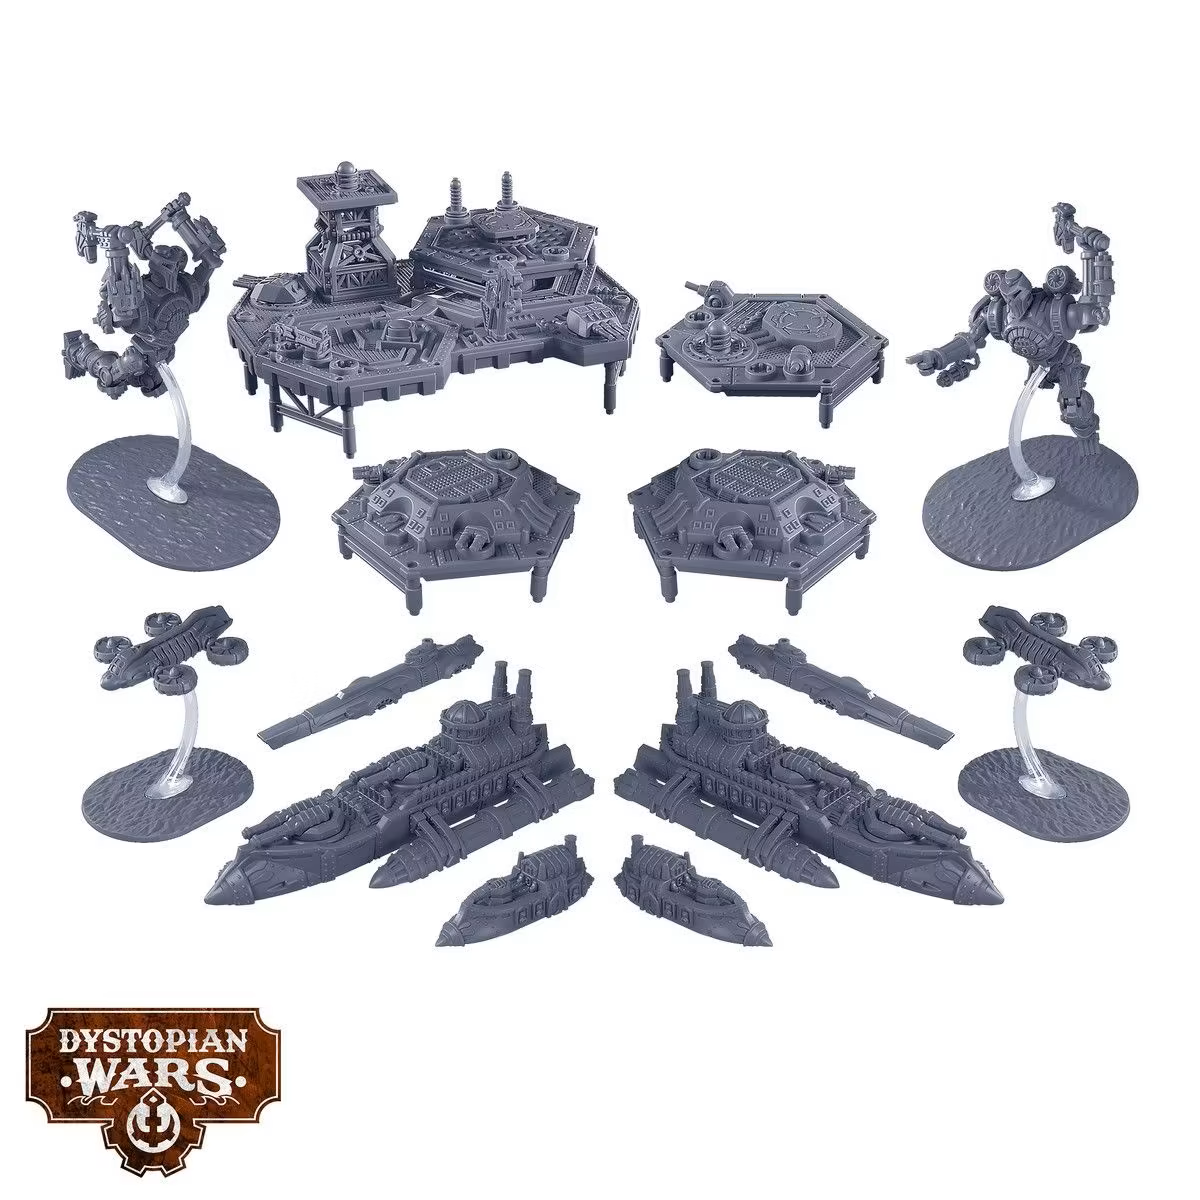 Dystopian Wars Core Set Beyond Fortune and Glory